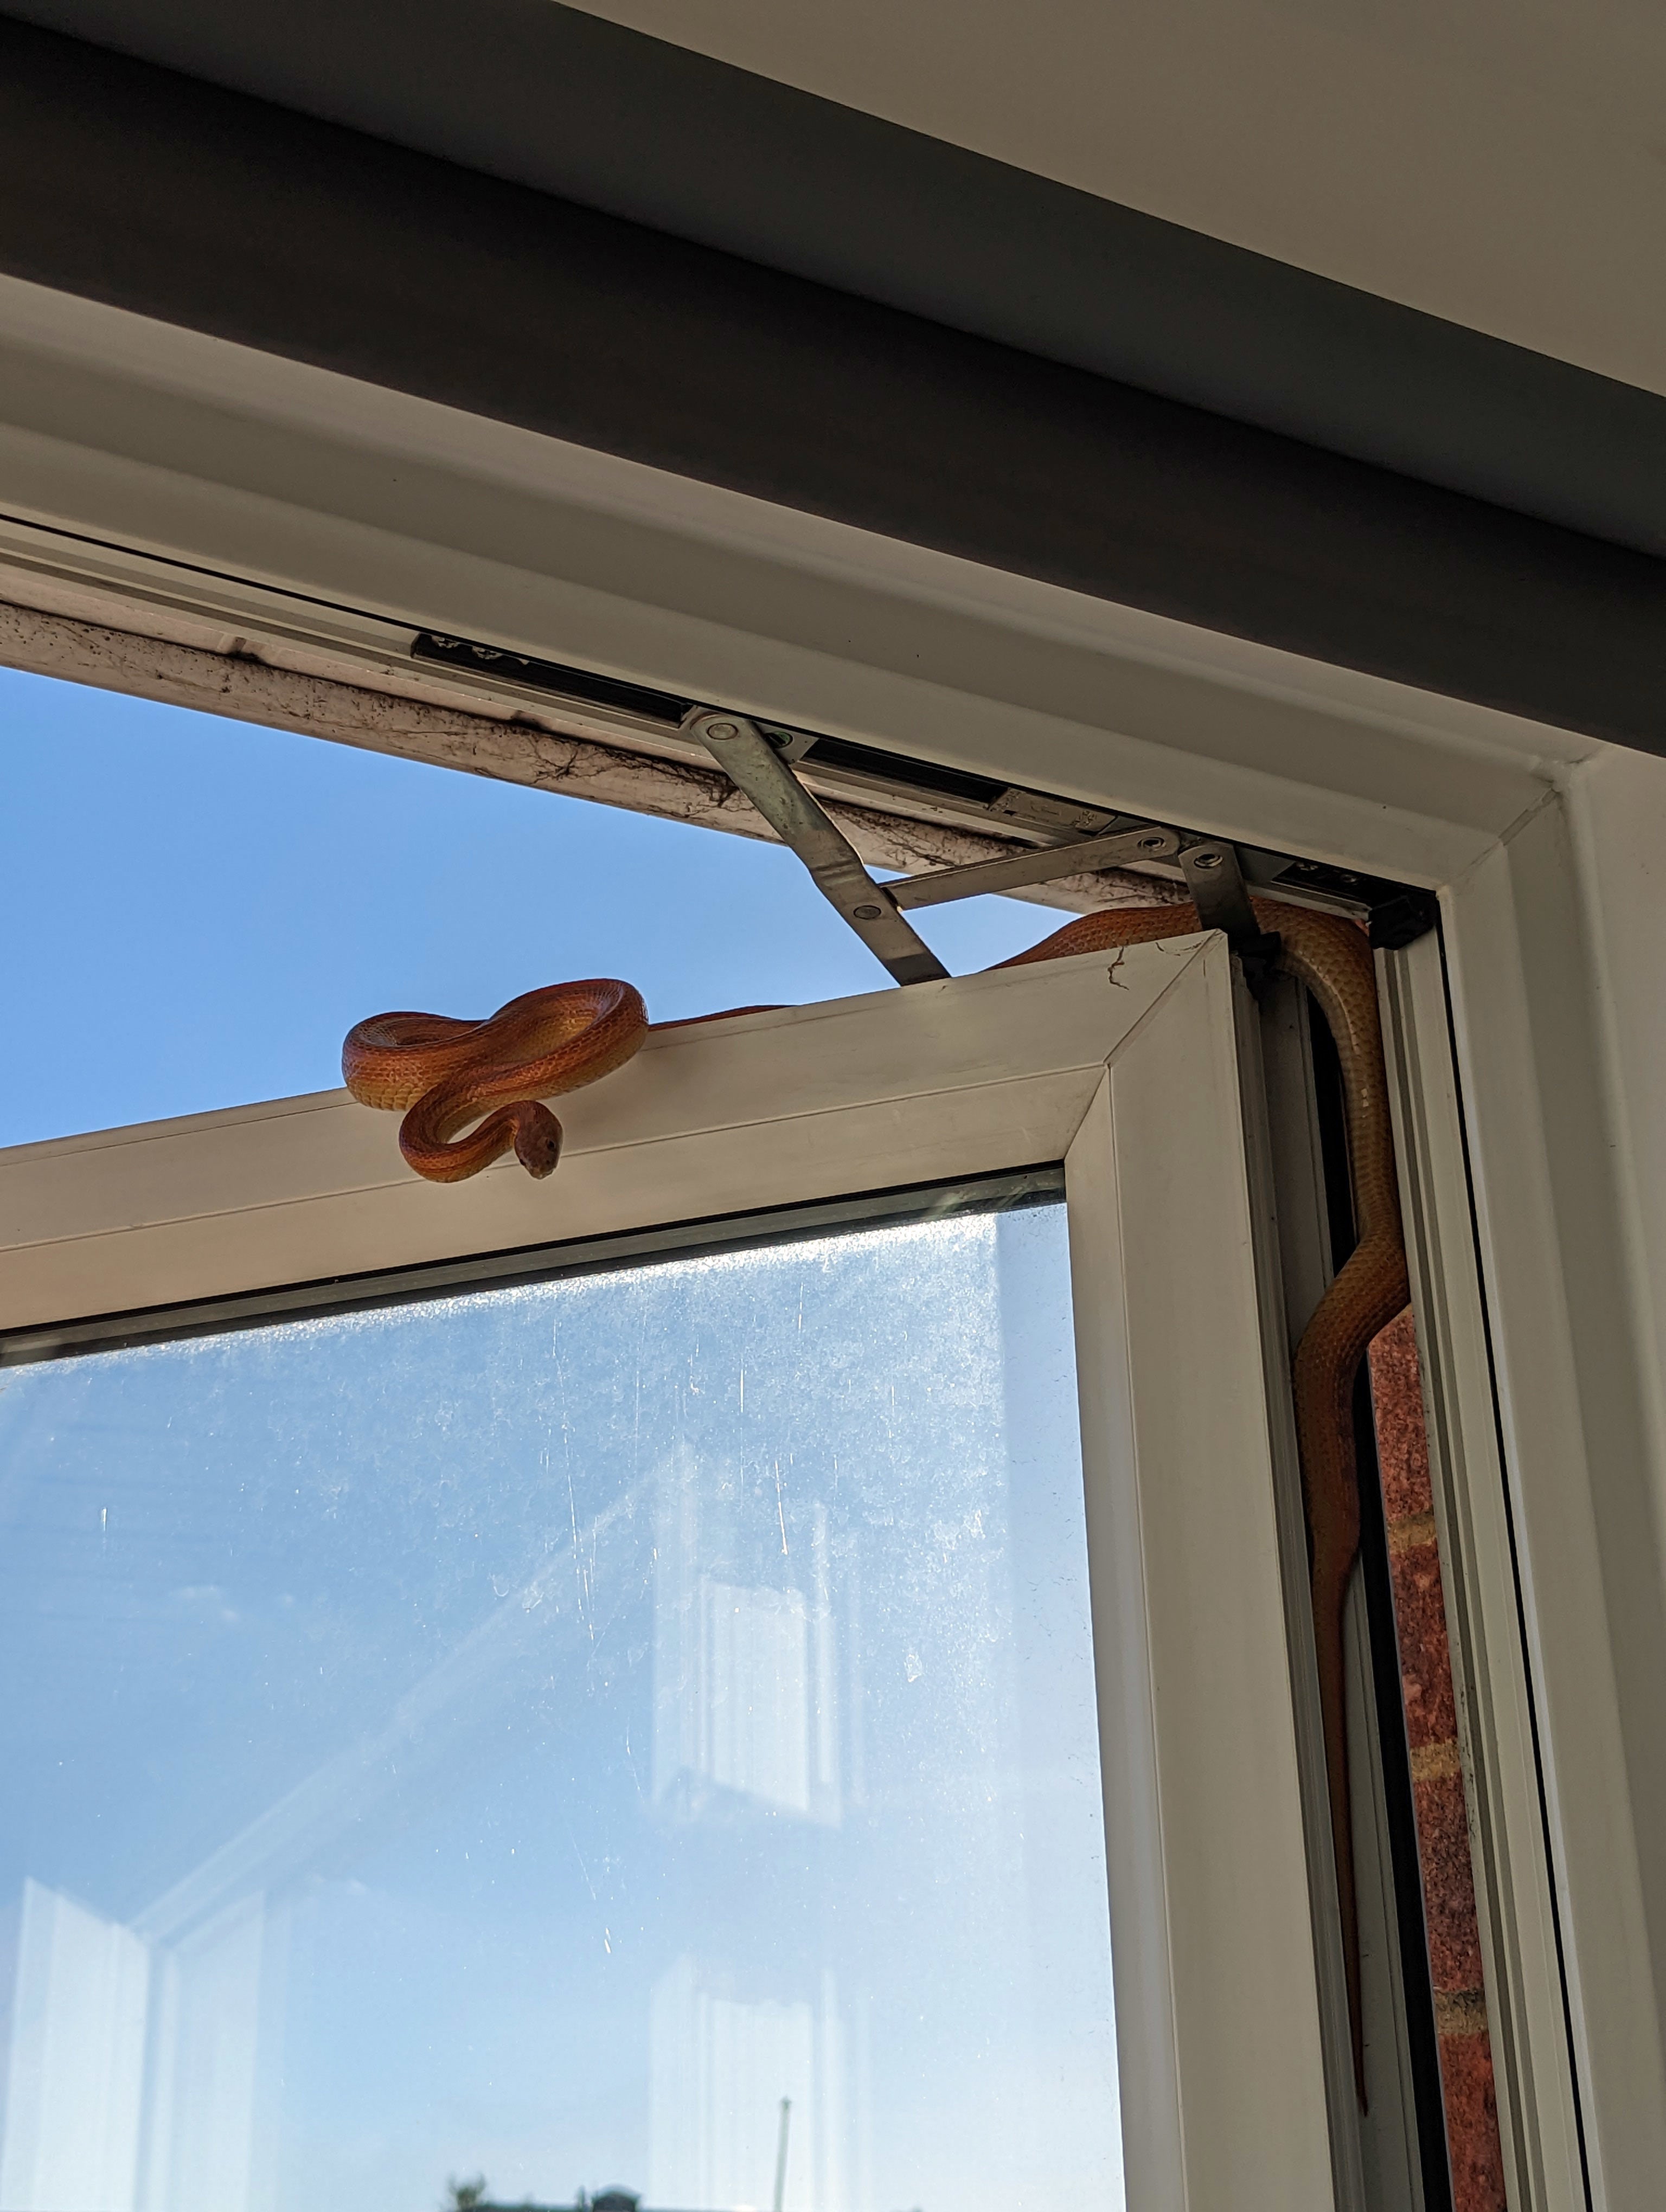 A corn snake attempts to come in through window frame of a home in Hereford Walk, Basildon